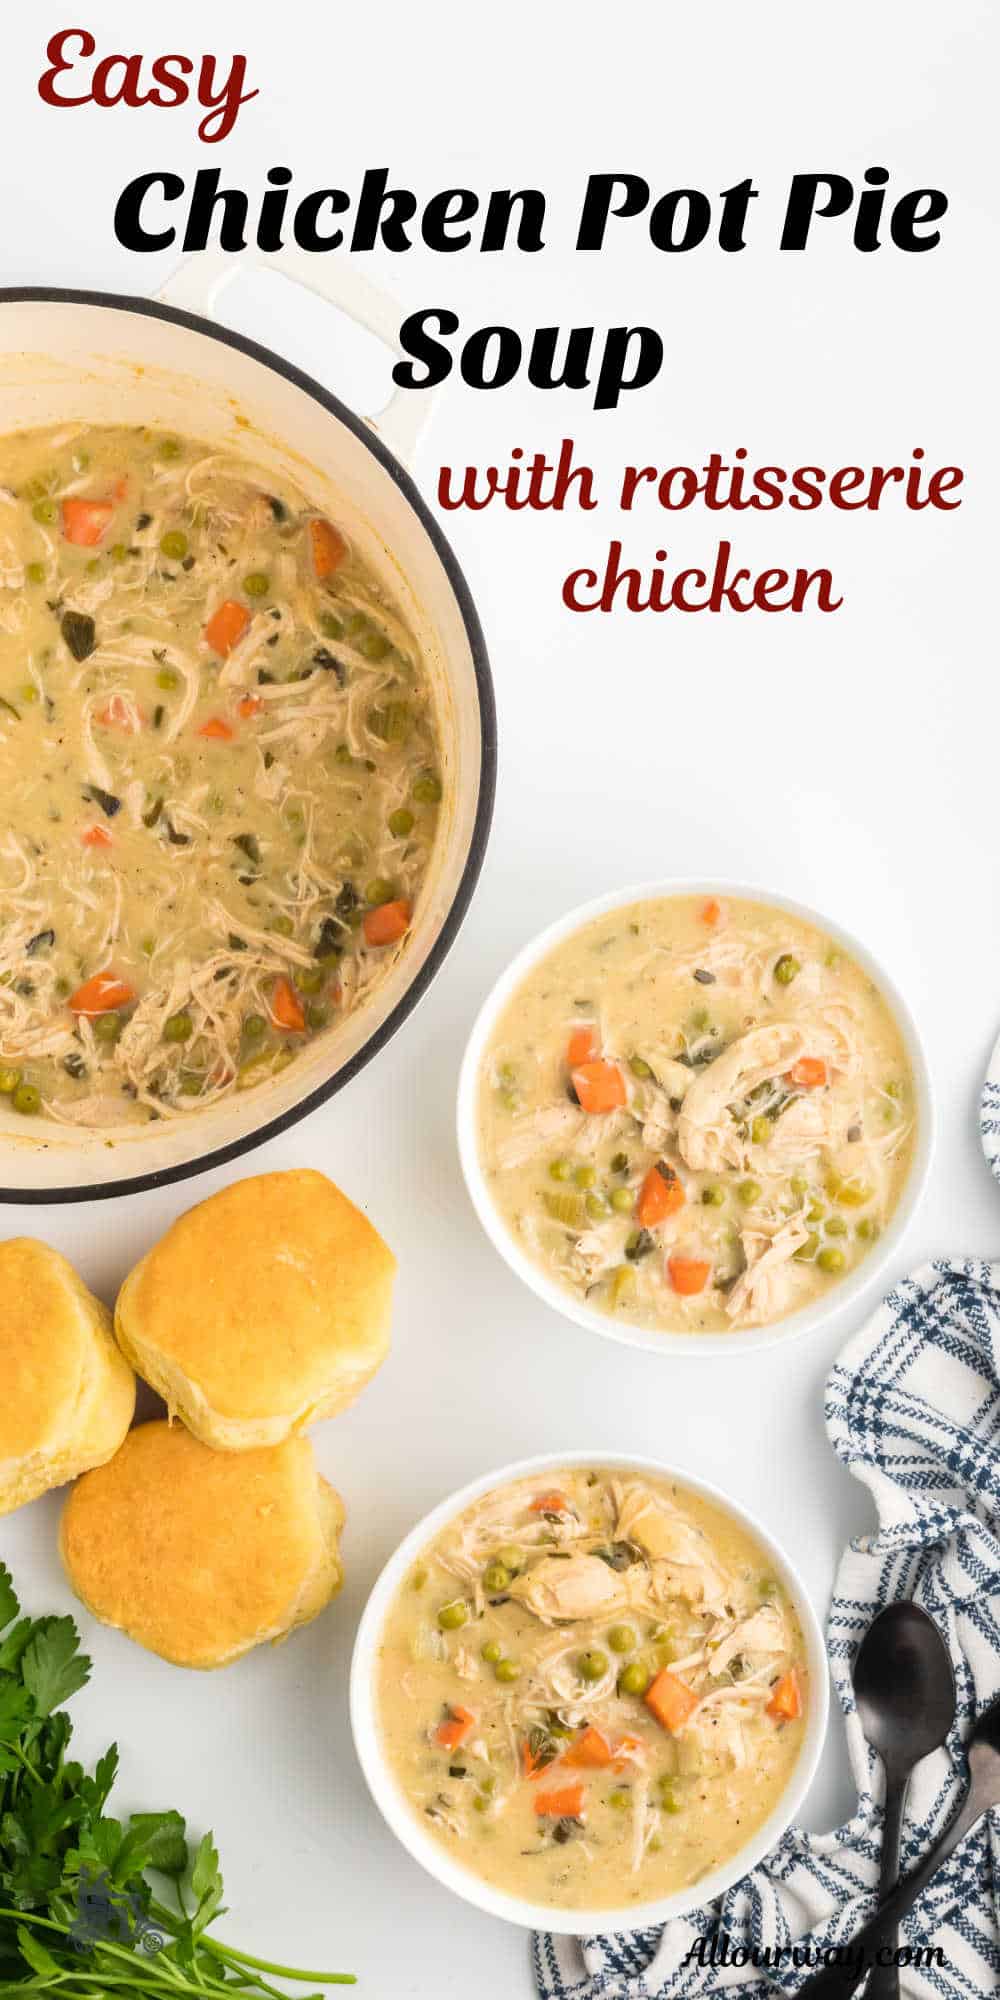 Pinterest image with title overlay featuring two white bowls and a Dutch oven filled with Chicken Pot Pie Soup.